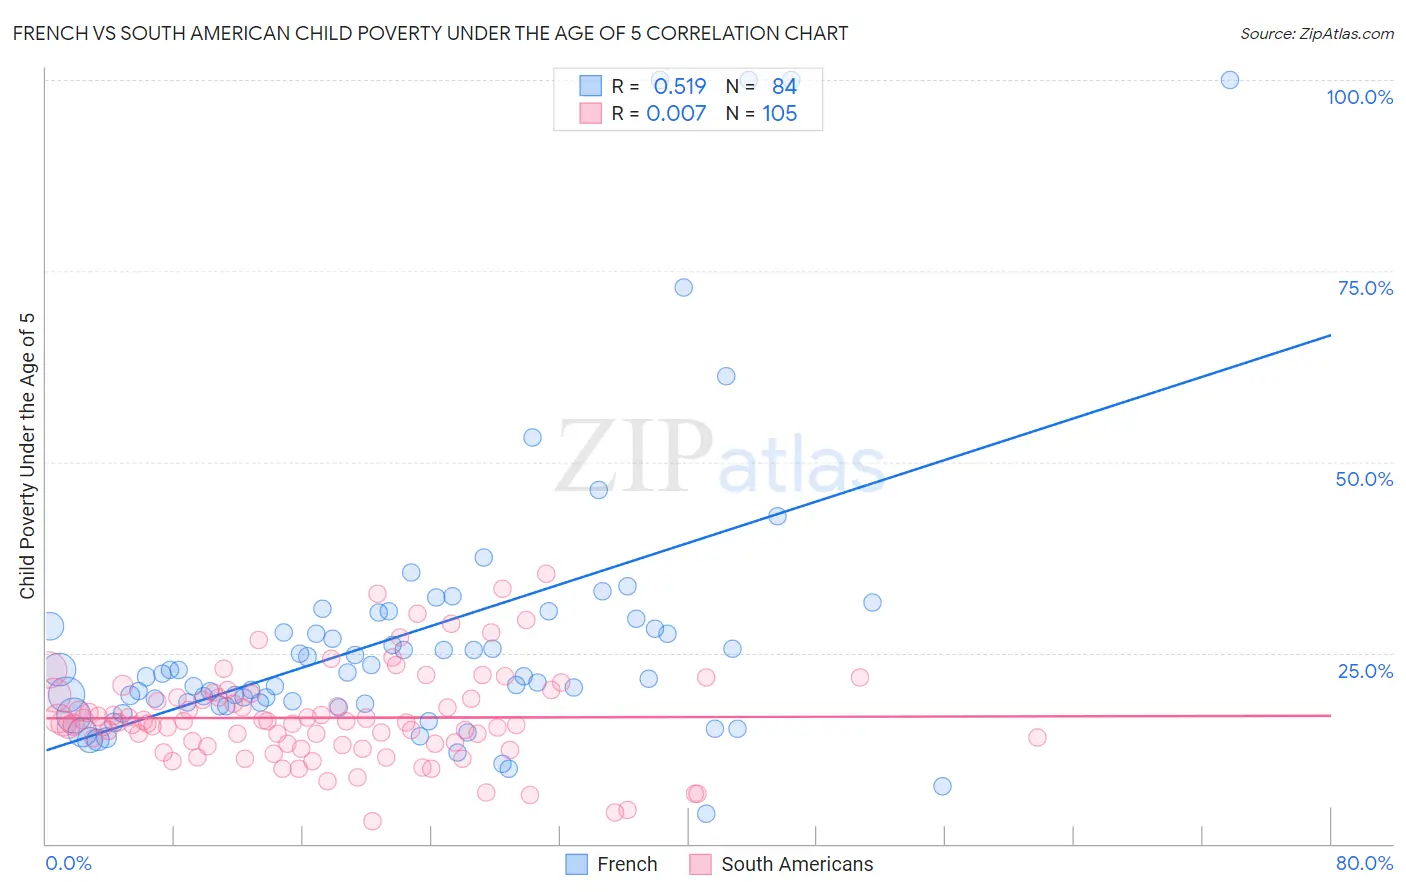 French vs South American Child Poverty Under the Age of 5